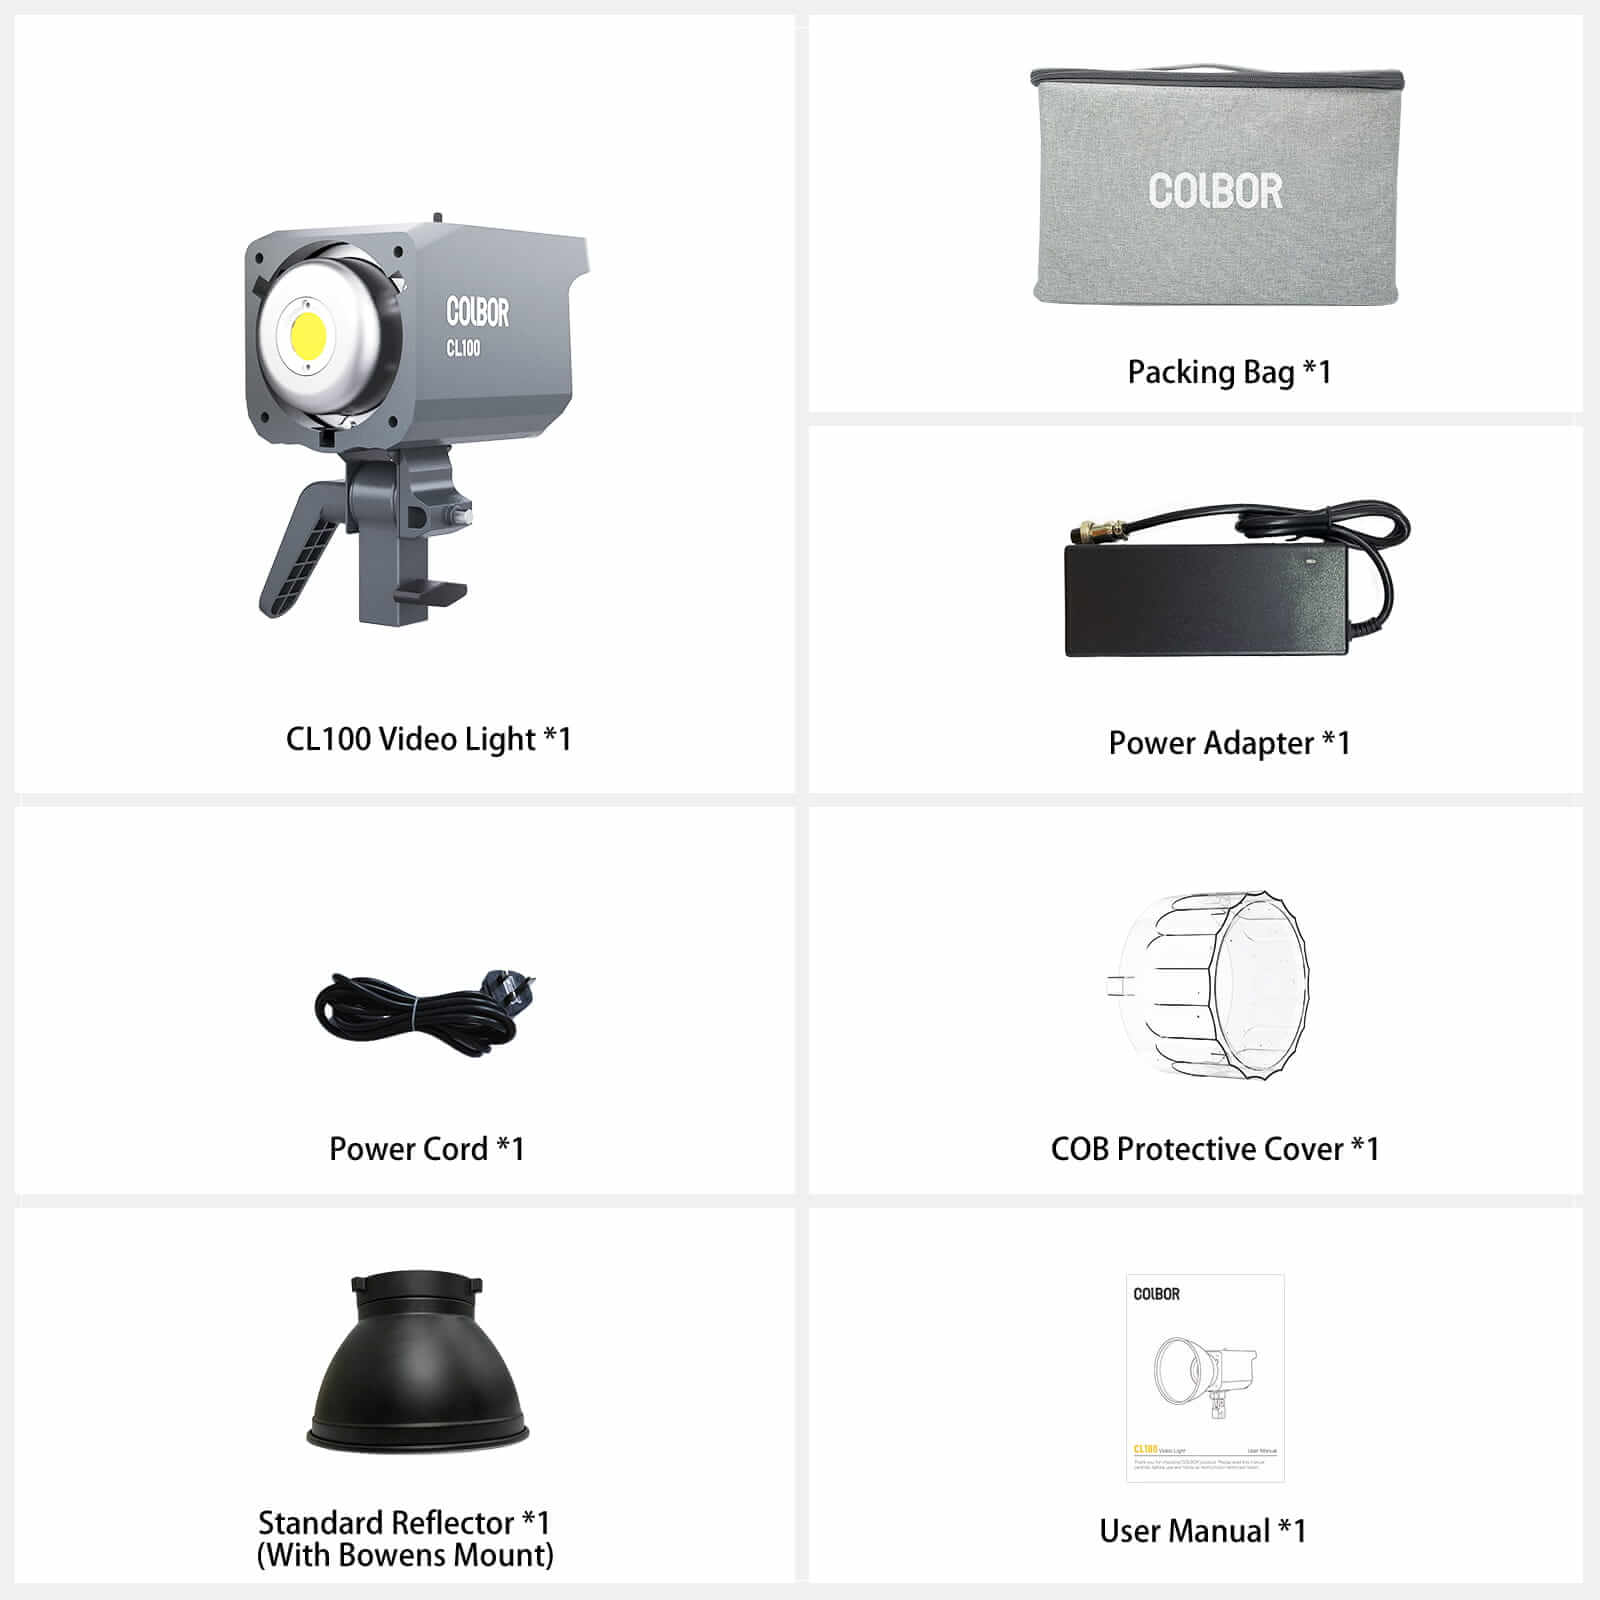 COLBOR CL100's package includes the CL100 video light, a power adapter, a power cord, a COB protective cover, a standard reflector and a packing bag